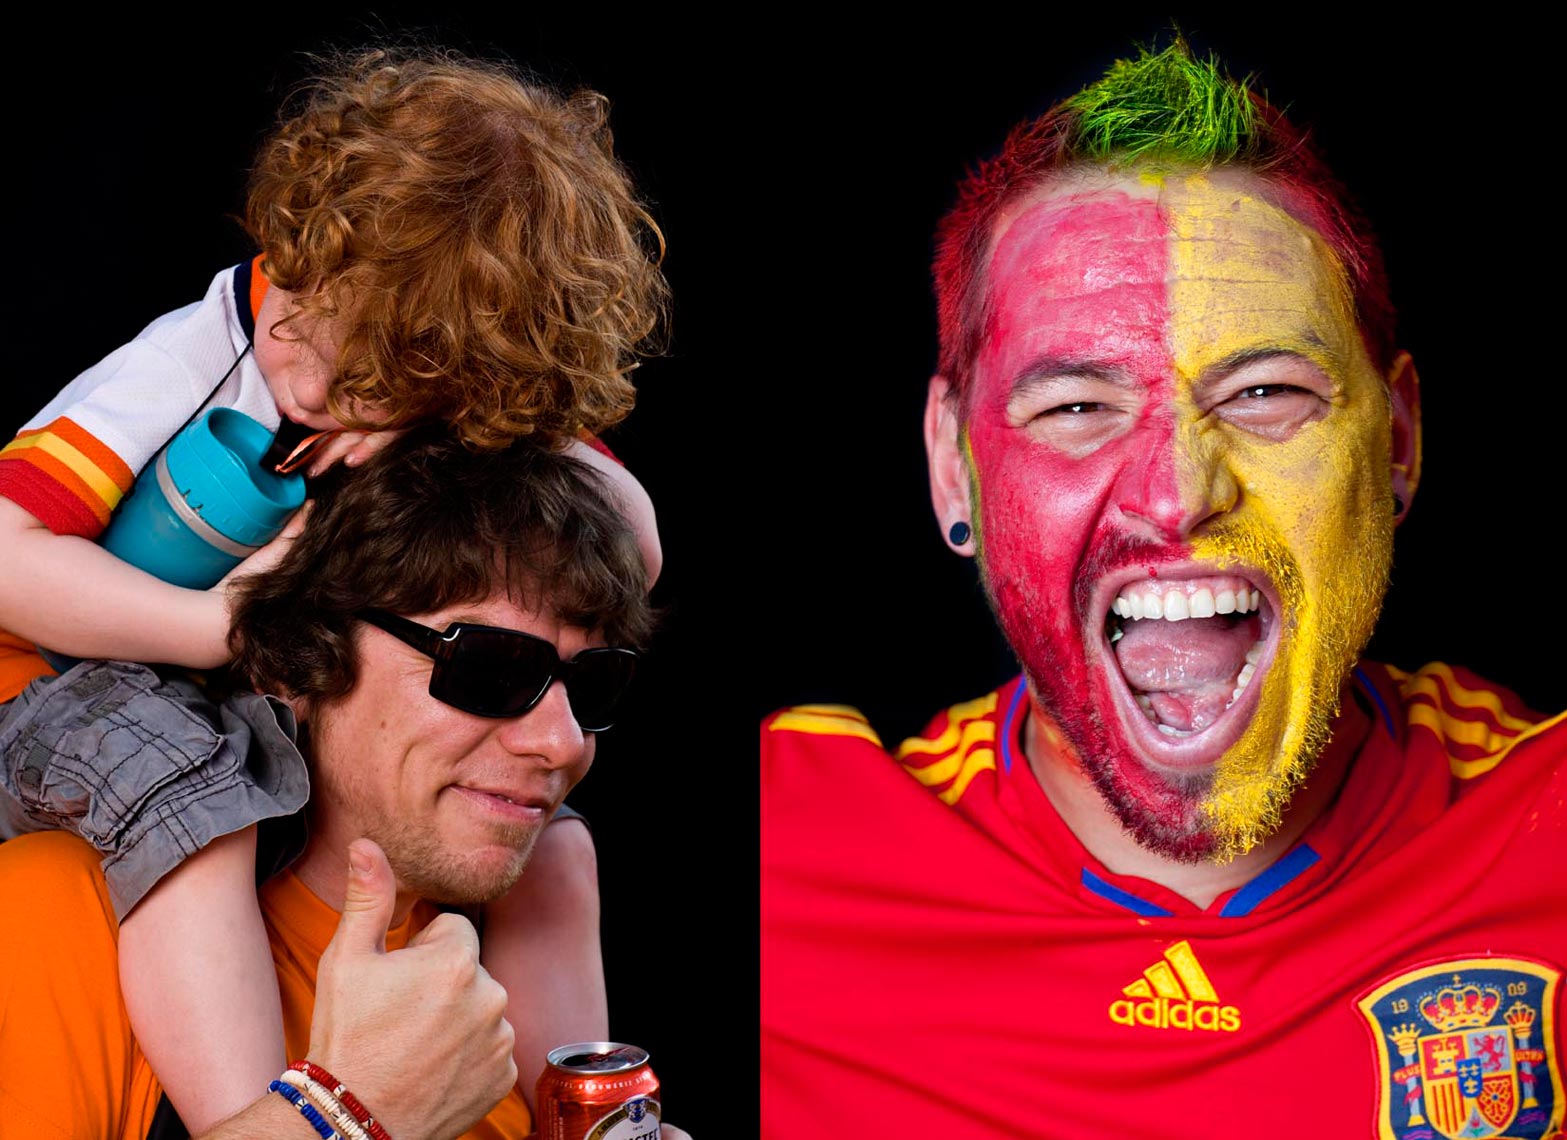 Holland and Spain World Cup Soccer fans